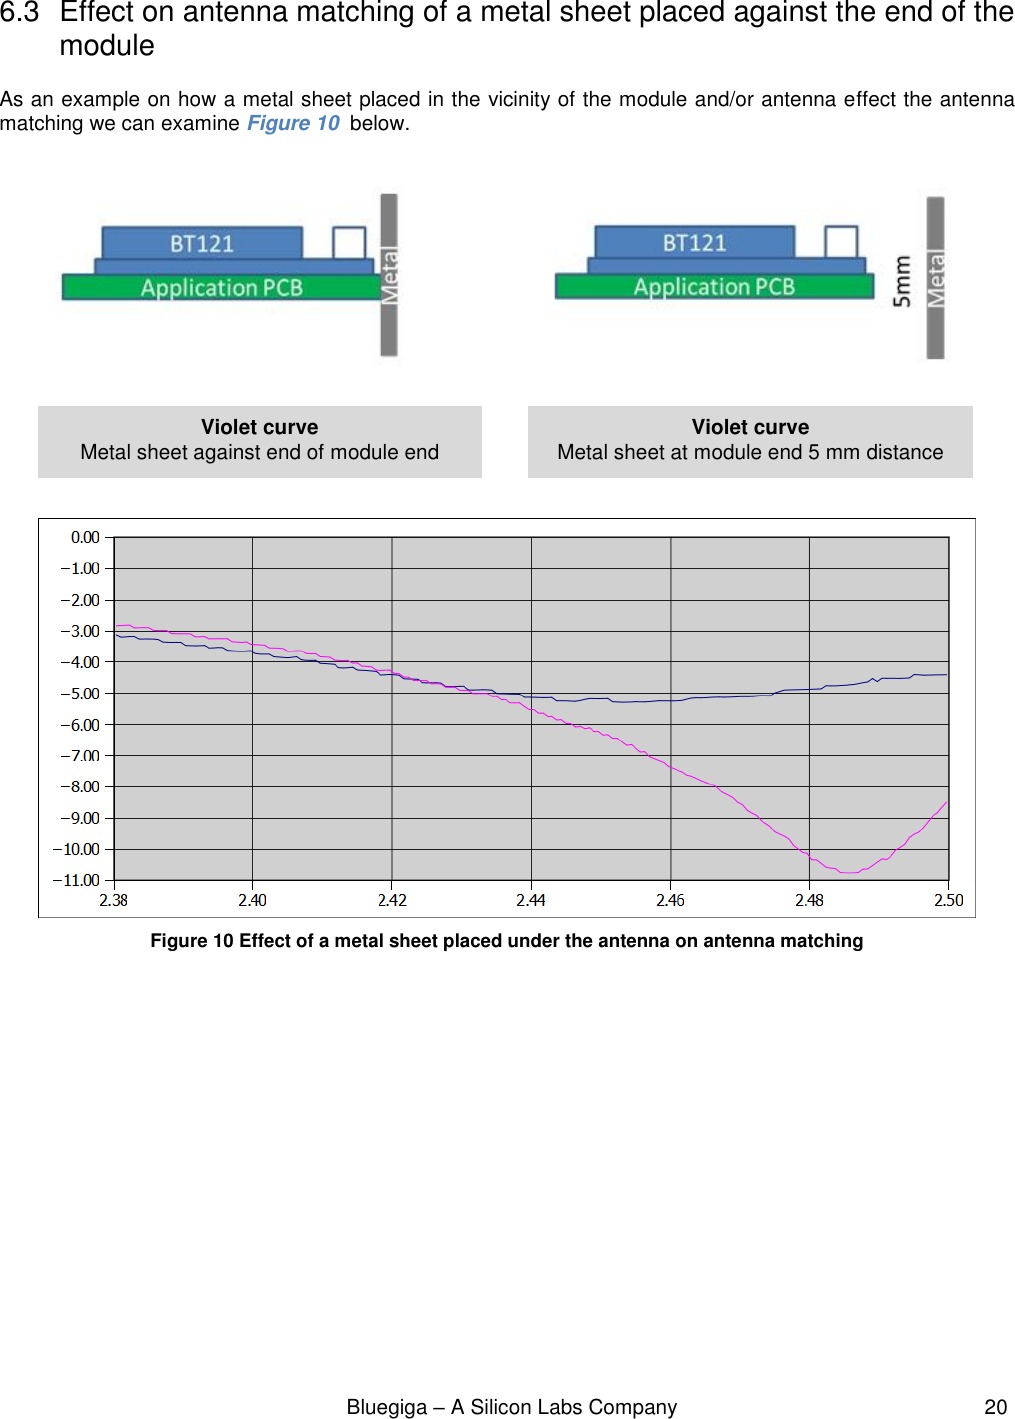                                                              Bluegiga – A Silicon Labs Company                                                     20  6.3  Effect on antenna matching of a metal sheet placed against the end of the module As an example on how a metal sheet placed in the vicinity of the module and/or antenna effect the antenna matching we can examine Figure 10  below.                   Figure 10 Effect of a metal sheet placed under the antenna on antenna matching                    Violet curve Metal sheet against end of module end Violet curve Metal sheet at module end 5 mm distance 